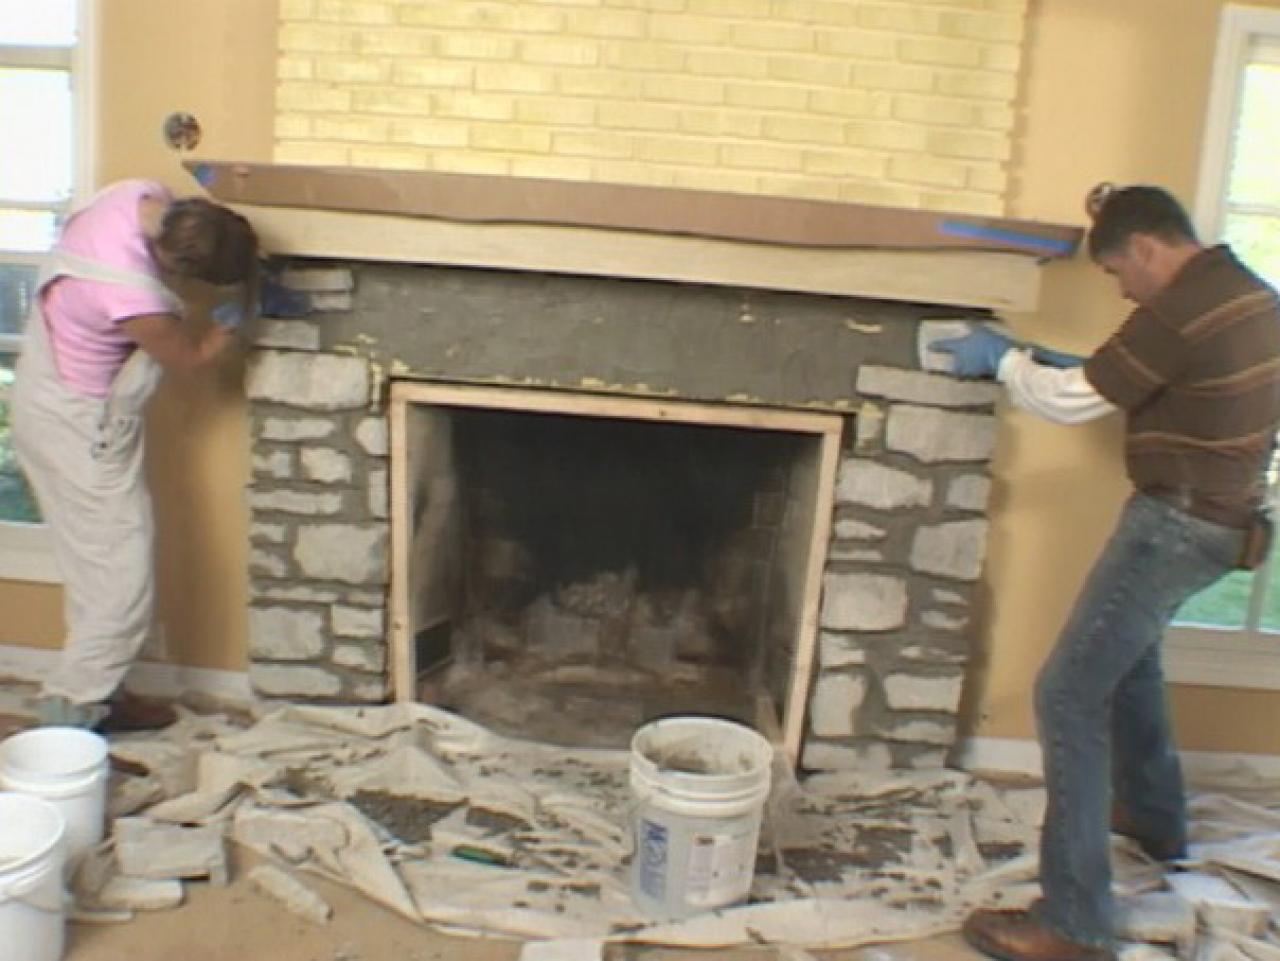 A Fireplace Mantel And Add Stone Veneer, Cost Of A Fireplace Mantel Installation